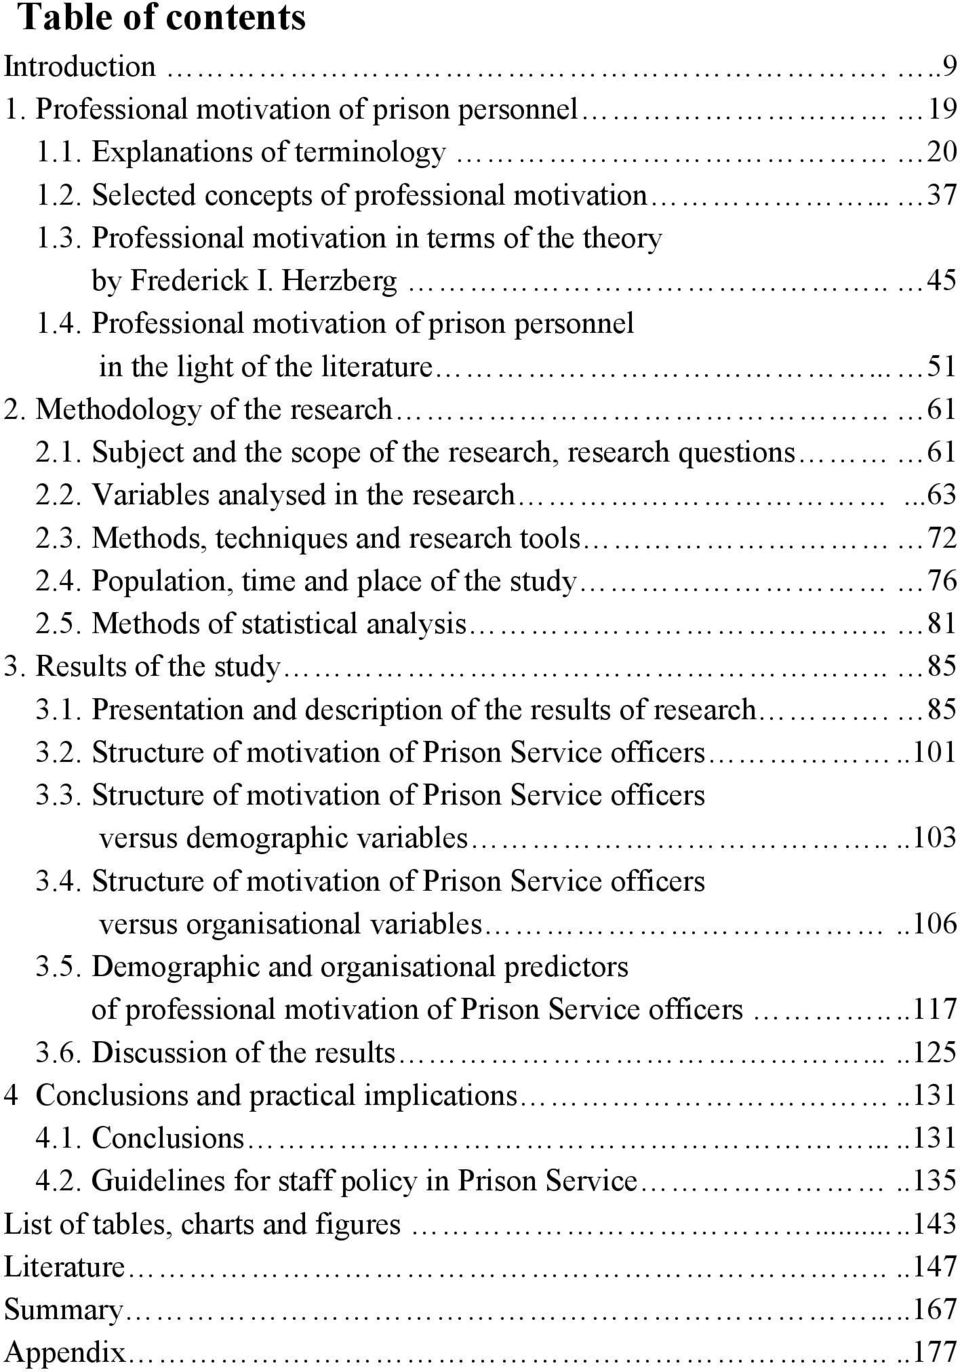 Methodology of the research 61 2.1. Subject and the scope of the research, research questions 61 2.2. Variables analysed in the research...63 2.3. Methods, techniques and research tools 72 2.4.